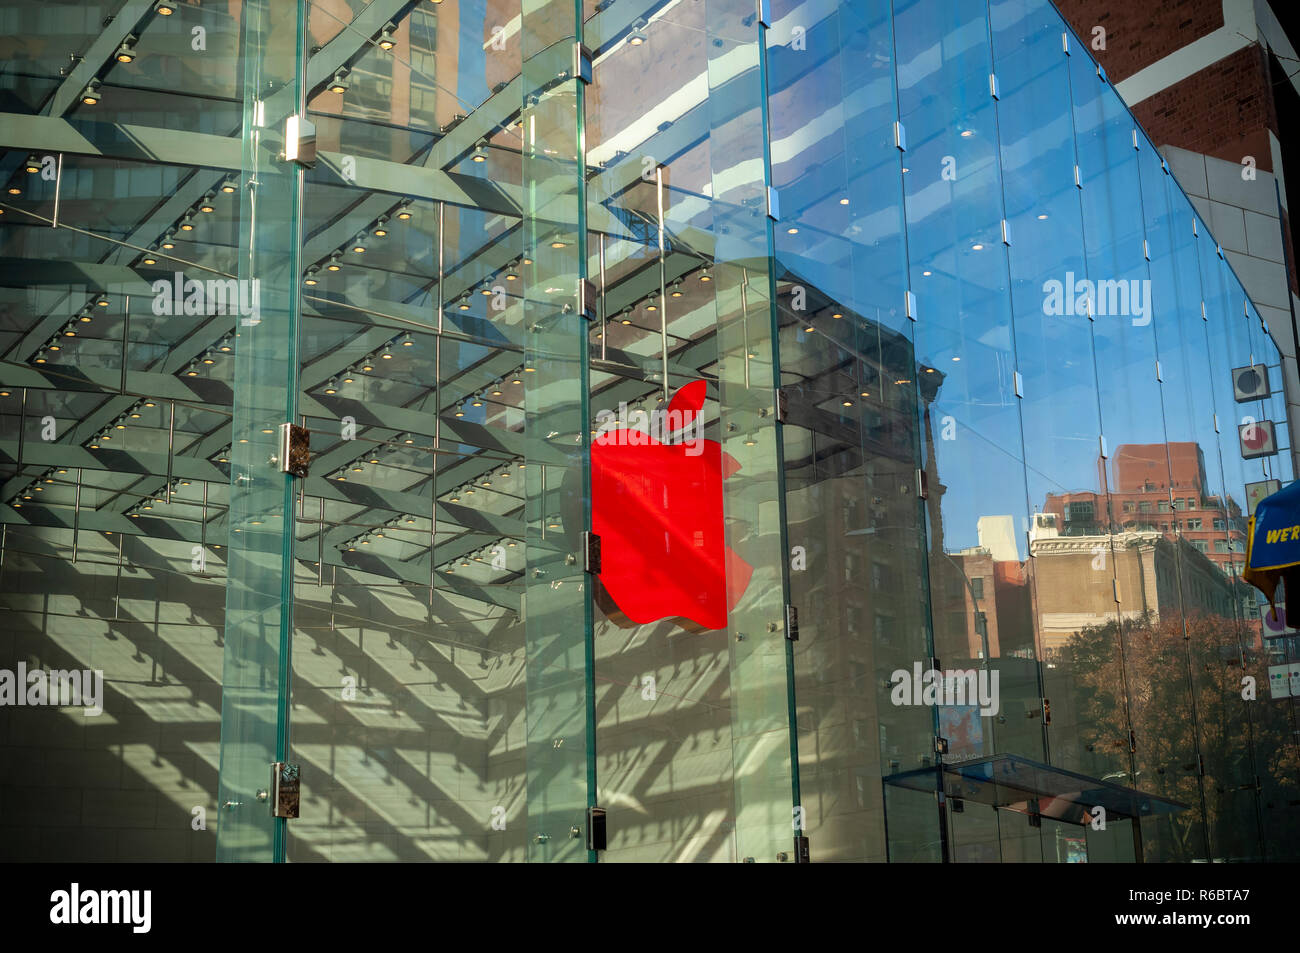 The Apple store in the Upper West Side neighborhood in New York displays its illuminated logo in (RED) marking World AIDS Day on Saturday, December 1, 2018. Apple will donate $1 for every transaction made with Apple Pay company wide to the Global Fund. 400 Apple stores have decorated their logo in (RED). (Â© Richard B. Levine) Stock Photo